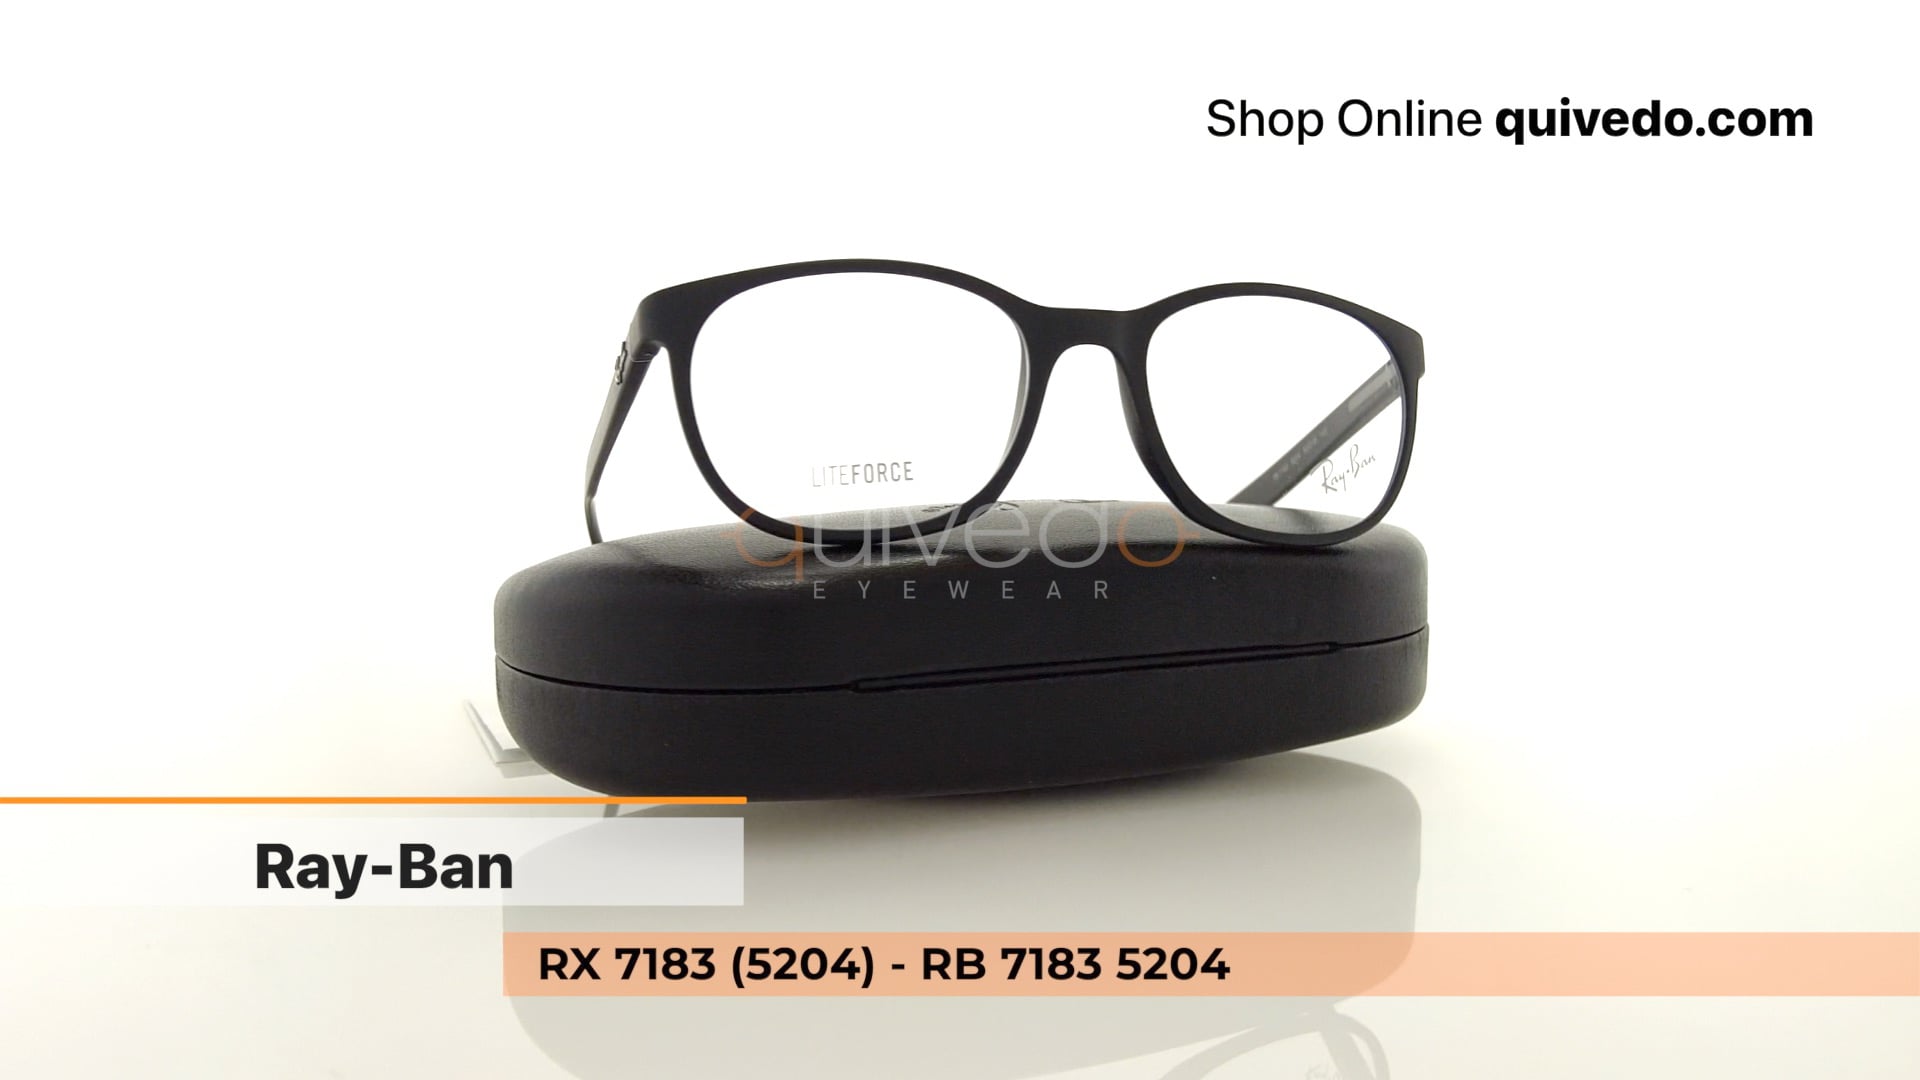 Ray-Ban RX 7183 (5204) - RB 7183 5204